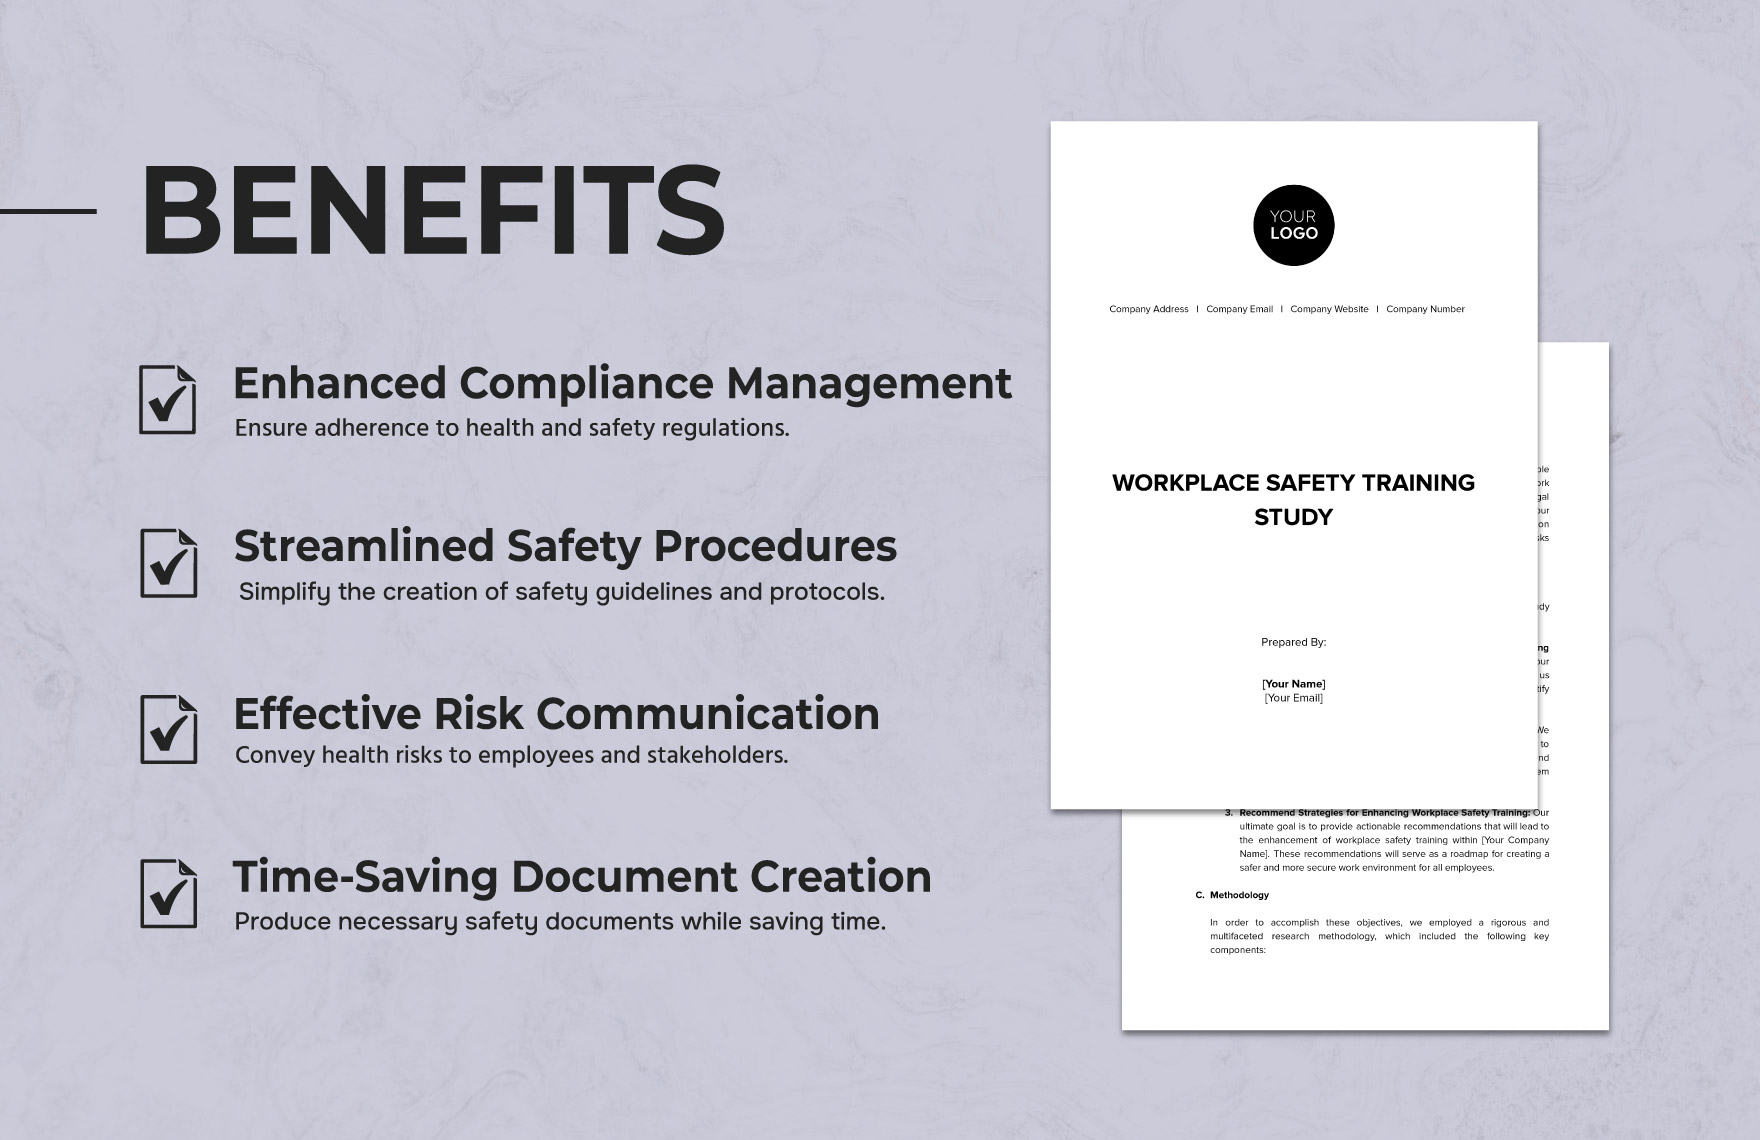 Workplace Safety Training Study Template